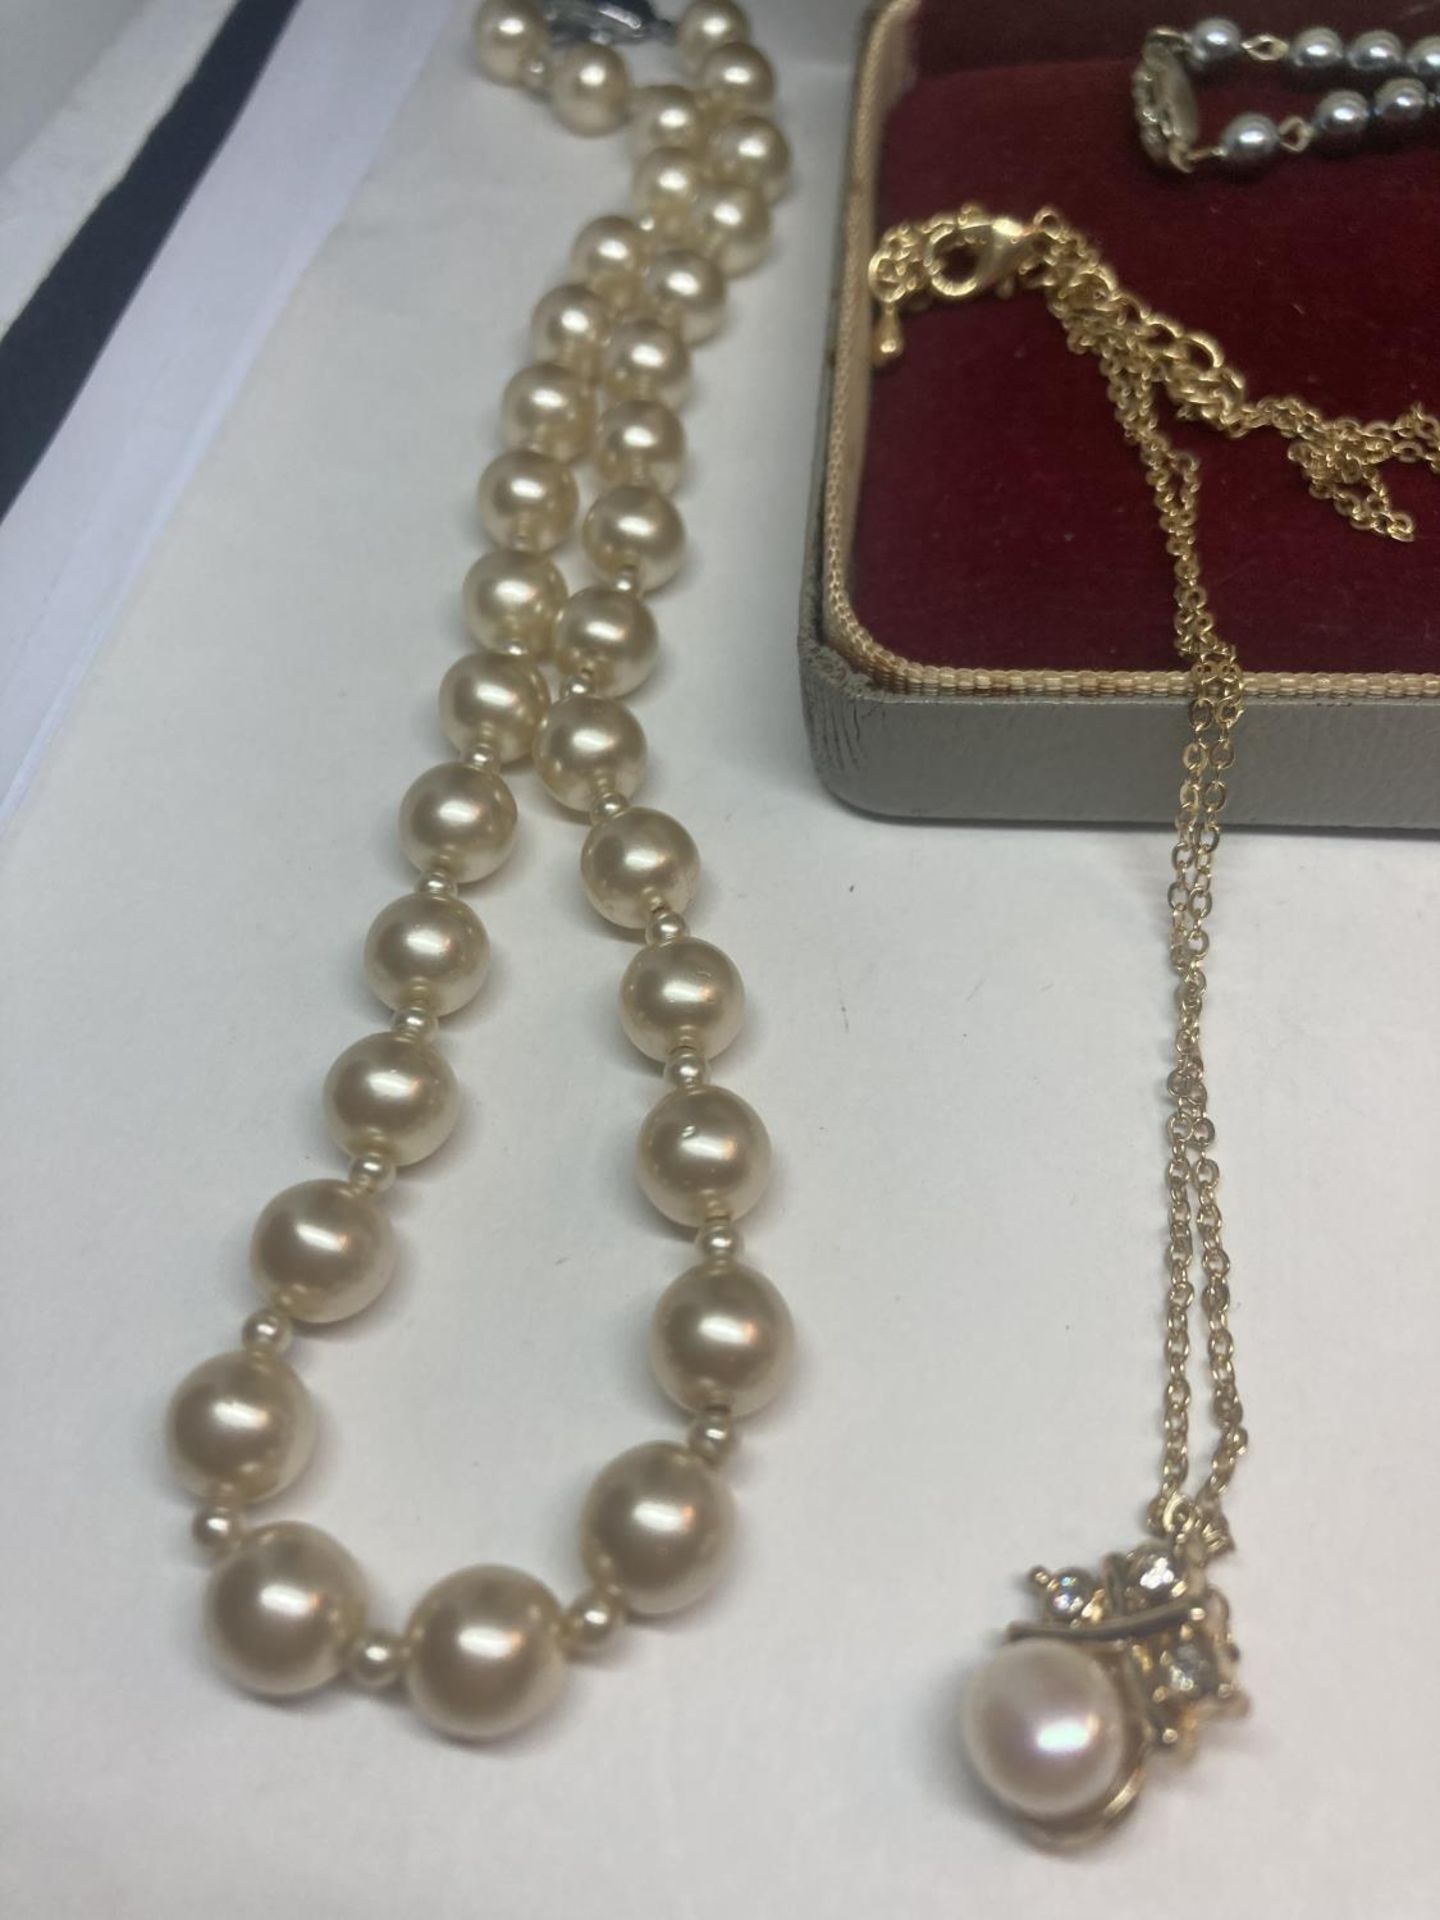 THREE PEARL NECKLACES AND A MARCASITE BROOCH - Image 4 of 8